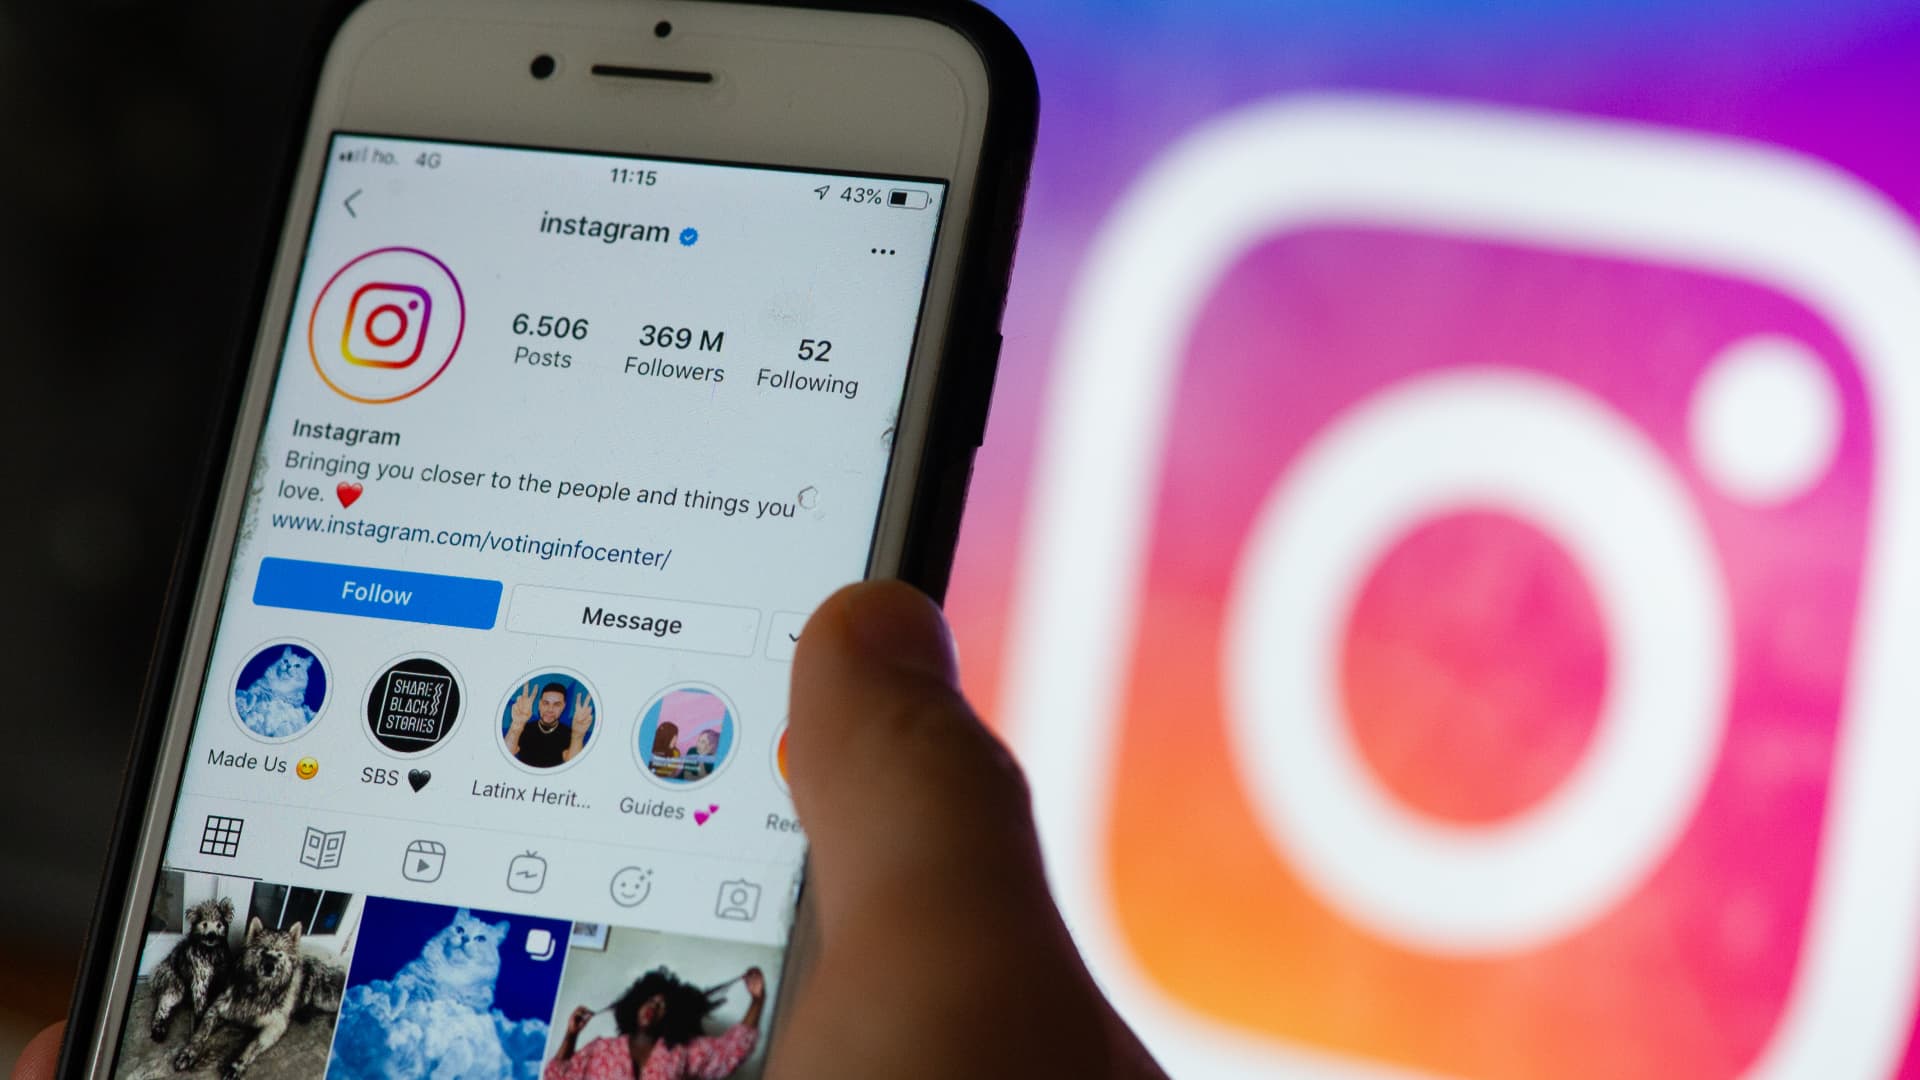 7 simple steps to get more Instagram engagement